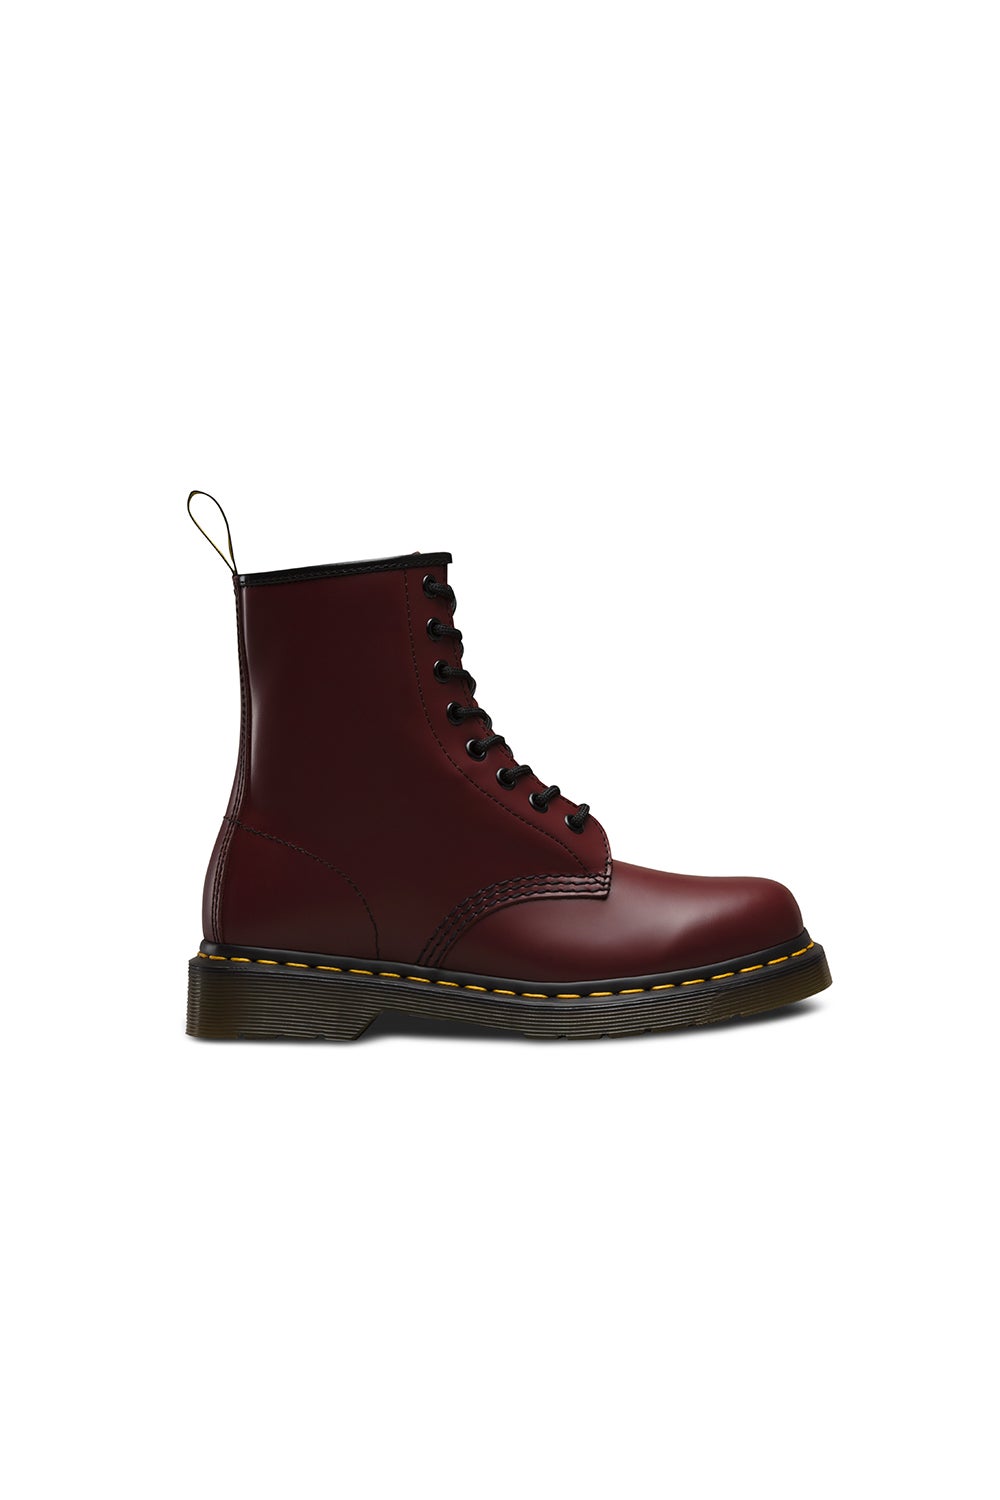 Dr. Martens 1460 8 Eye Smooth Boot Cherry